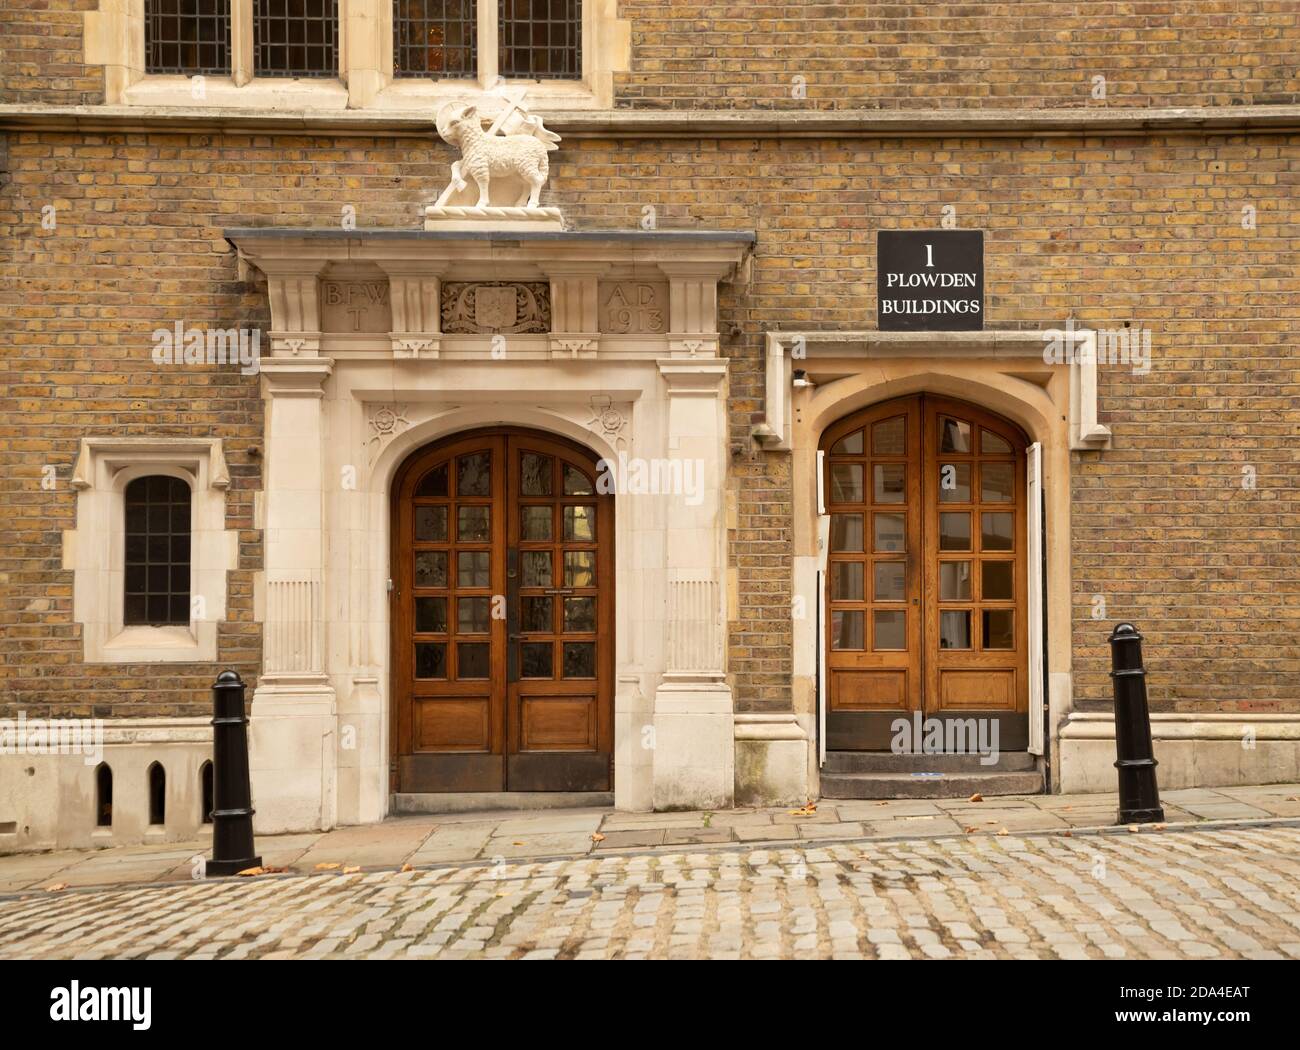 Entrance to 1 Plowden Buildings, Temple, London. UK. Stock Photo